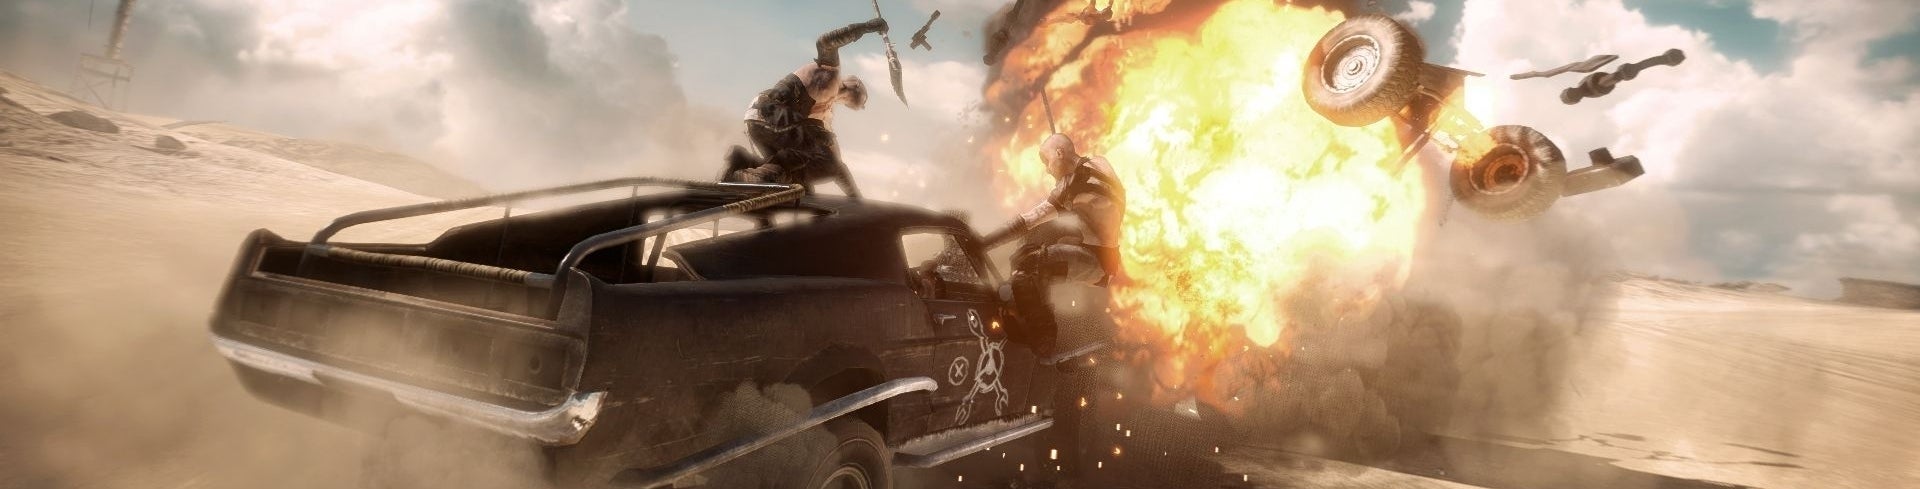 Image for Mad Max preview: Bringing Just Cause's insanity to the wilds